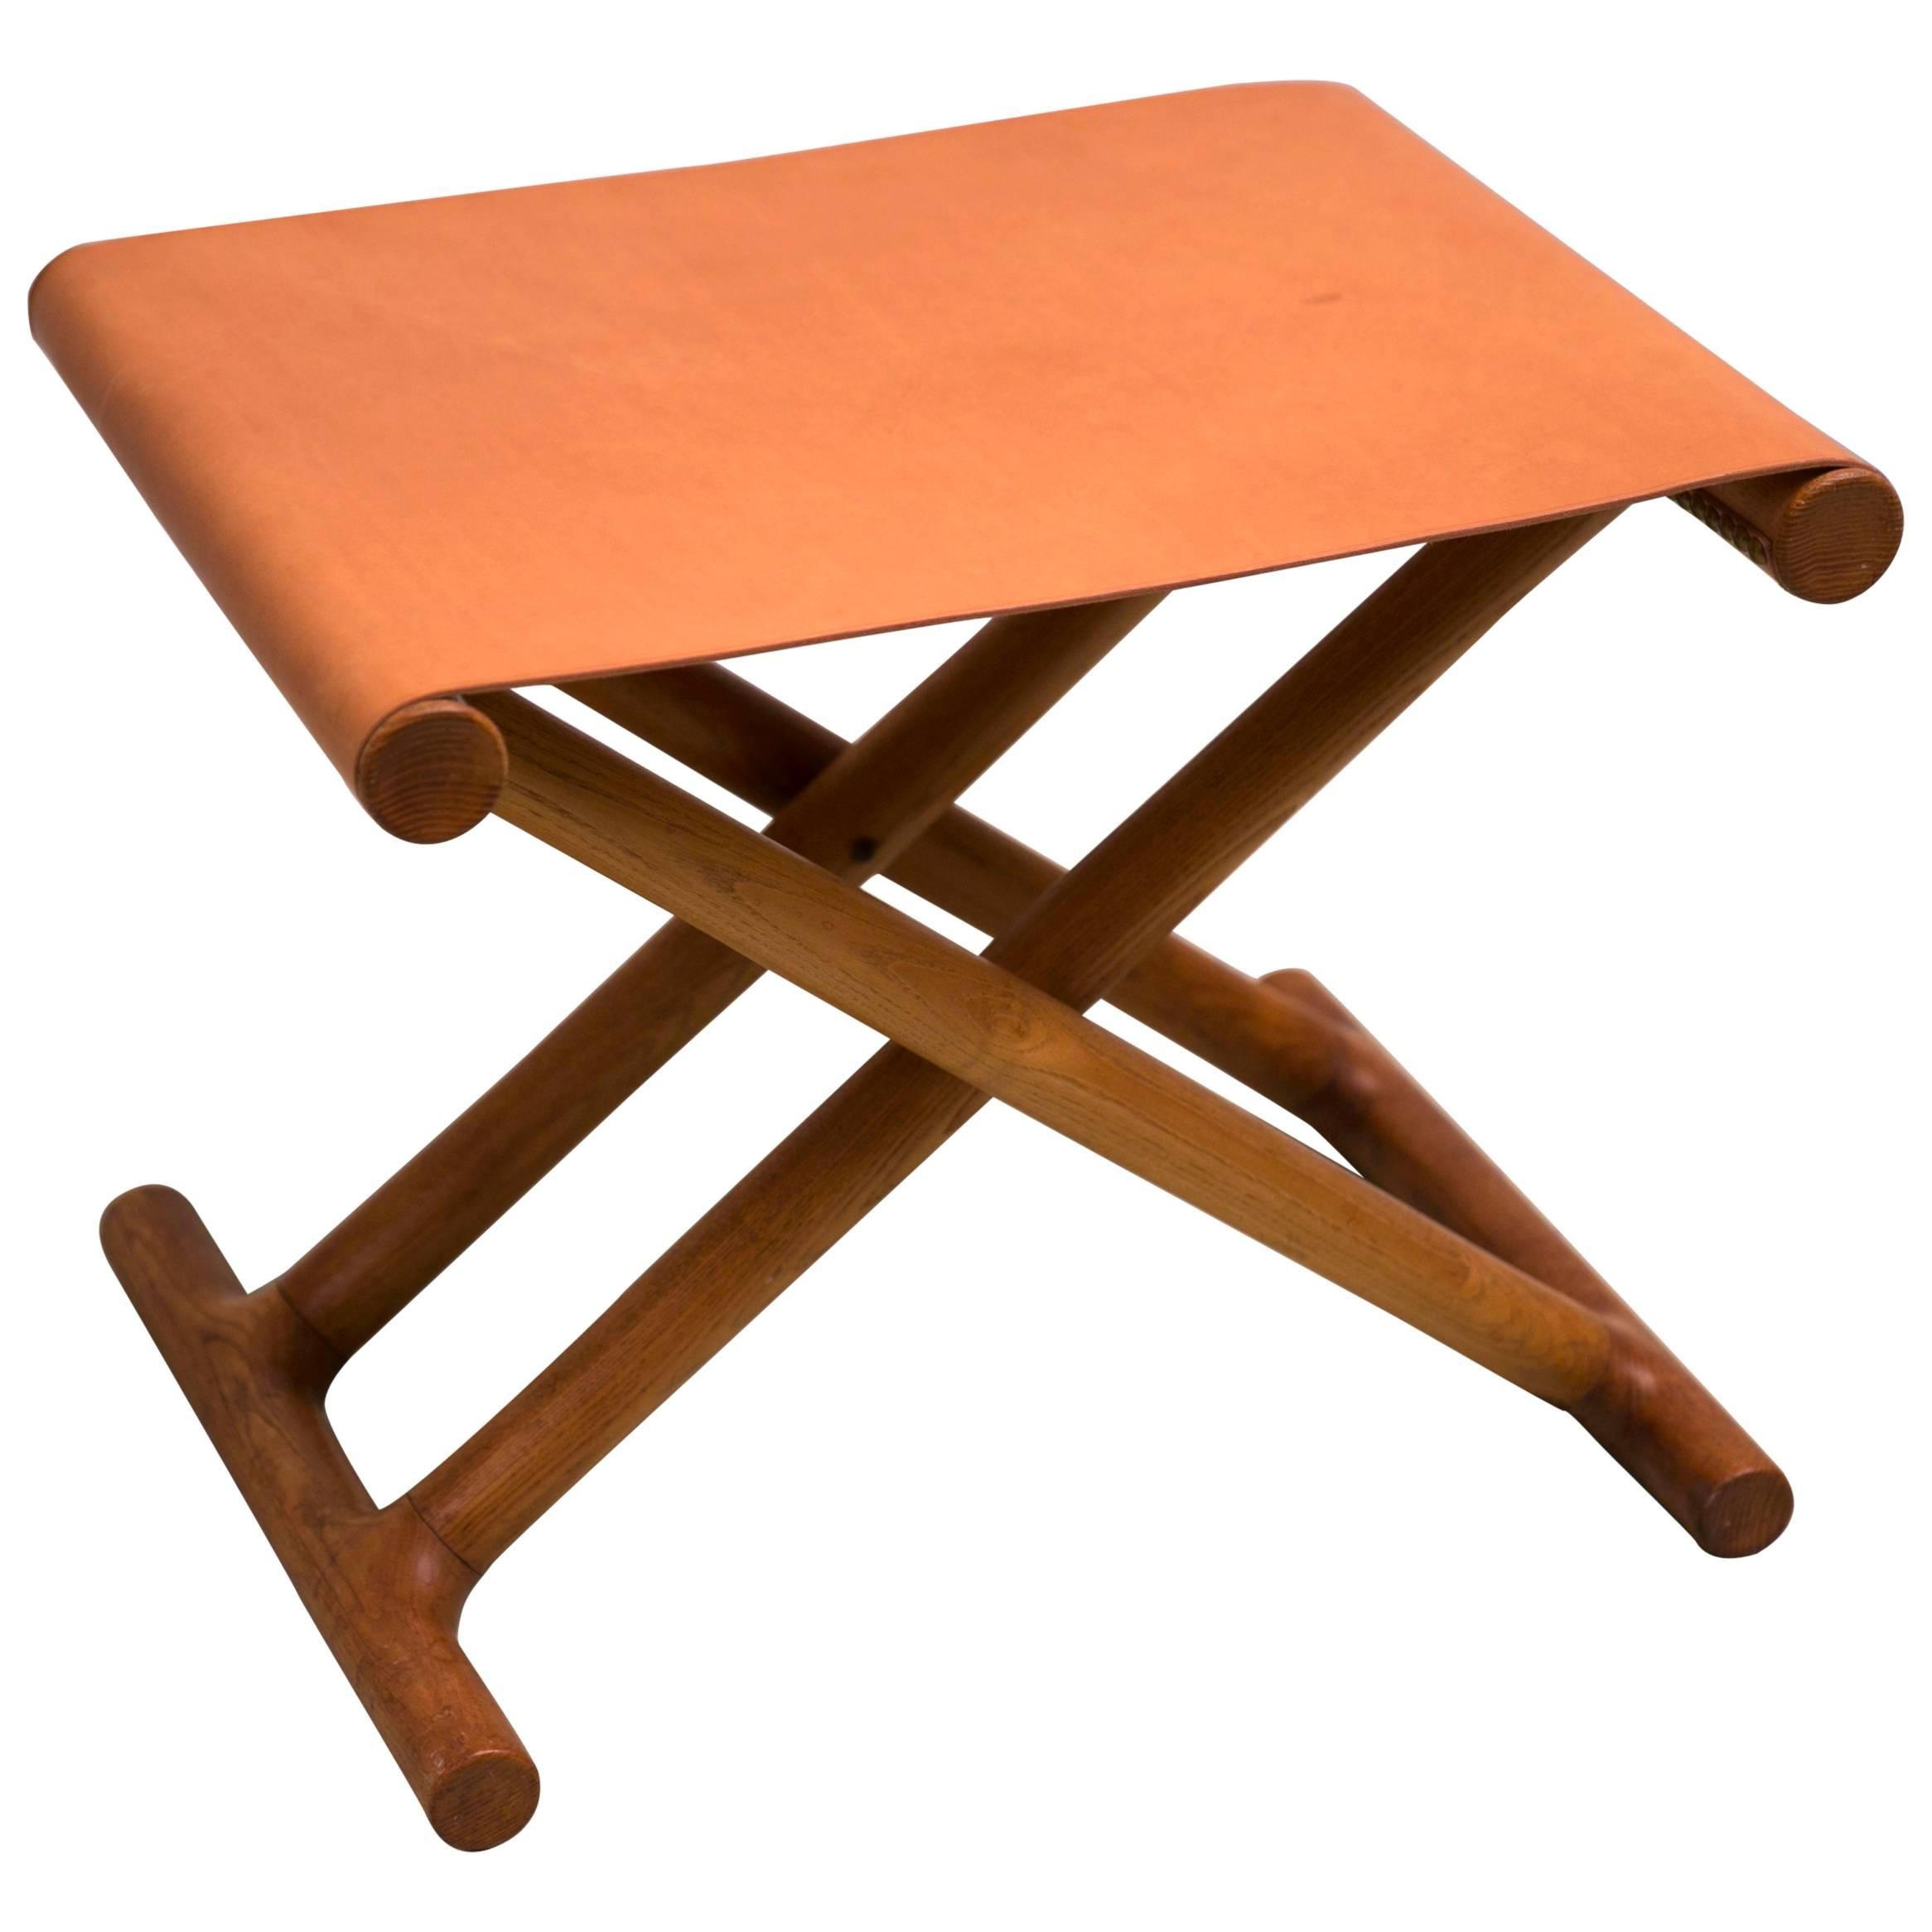 Mogens Lassen's, 1946 Egyptian Folding Stool in Ash and Natural Leather